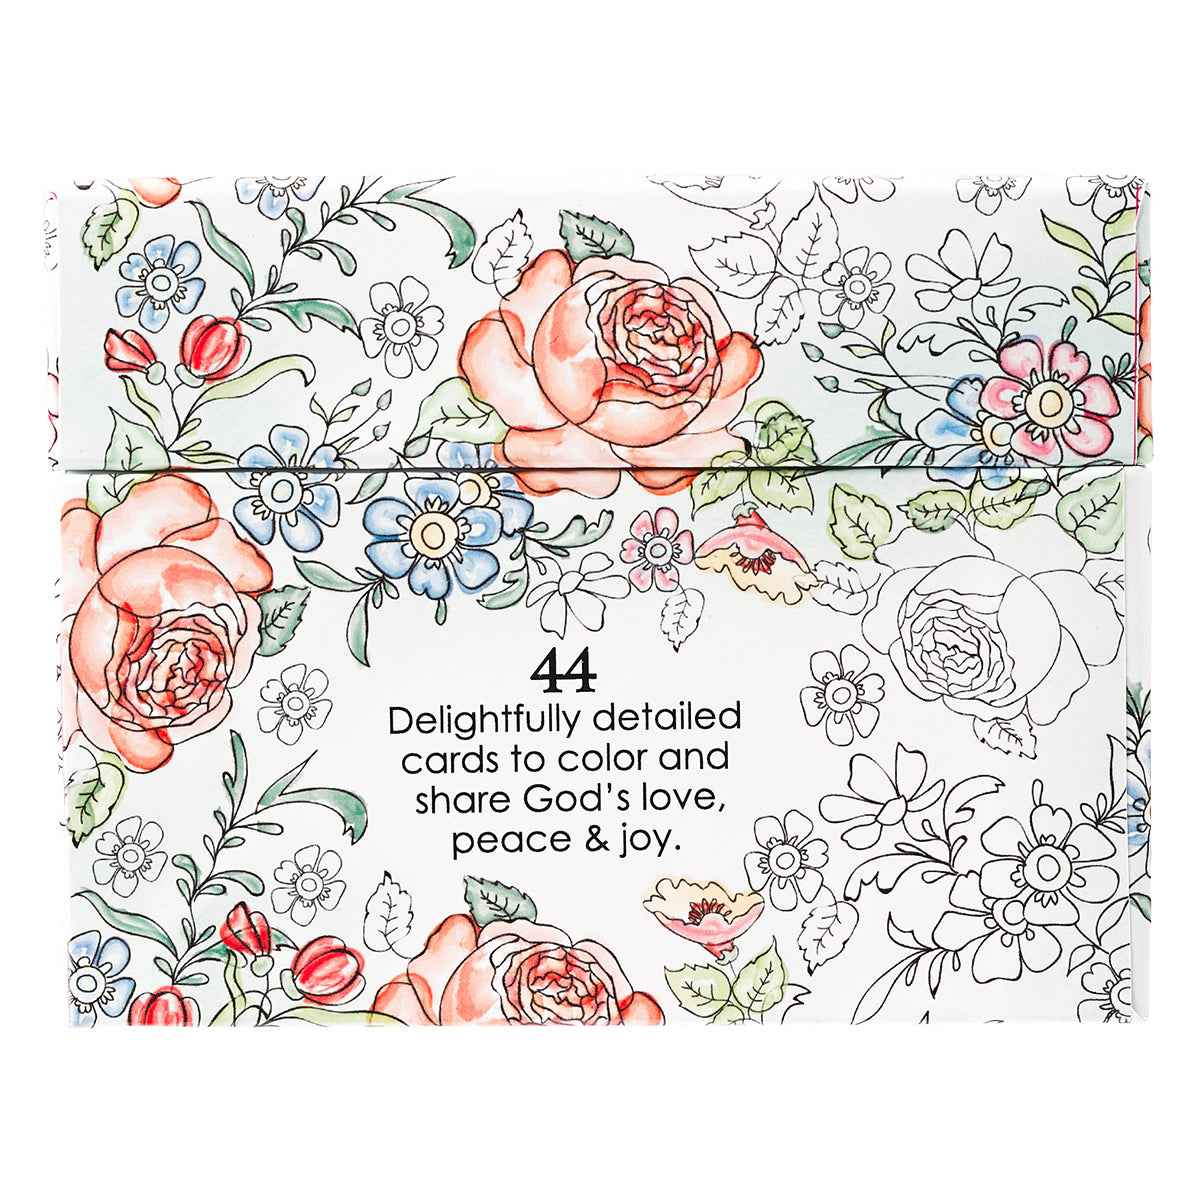 Colorful Blessings Colouring Cards - The Christian Gift Company